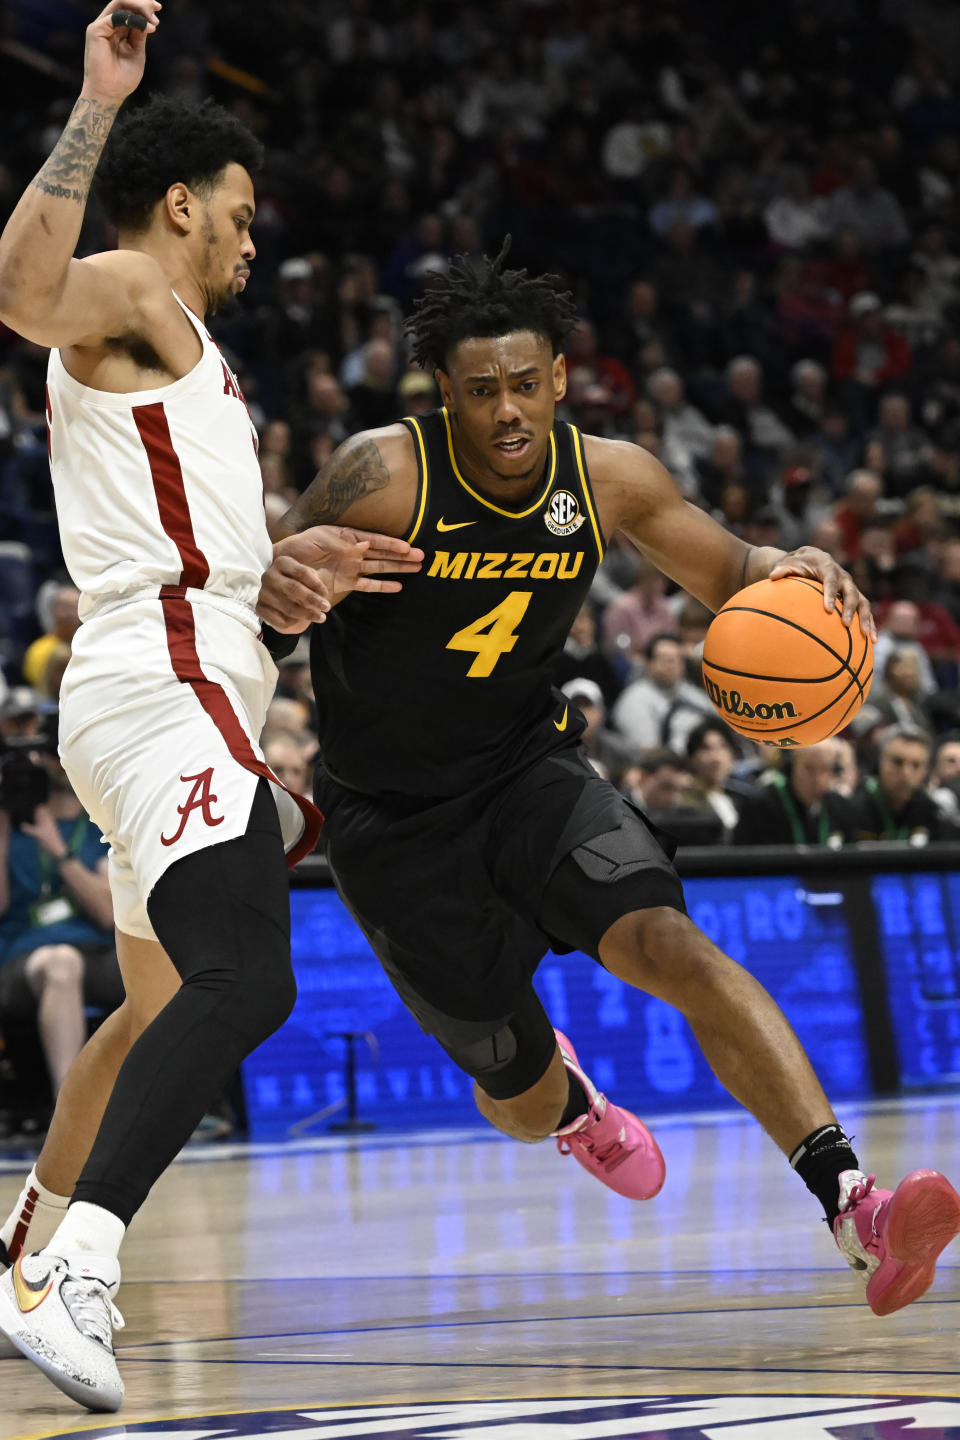 Missouri guard DeAndre Gholston (4) drives on Alabama guard Dominick Welch during the first half of an NCAA college basketball game in the semifinals of the Southeastern Conference Tournament, Saturday, March 11, 2023, in Nashville, Tenn. (AP Photo/John Amis)